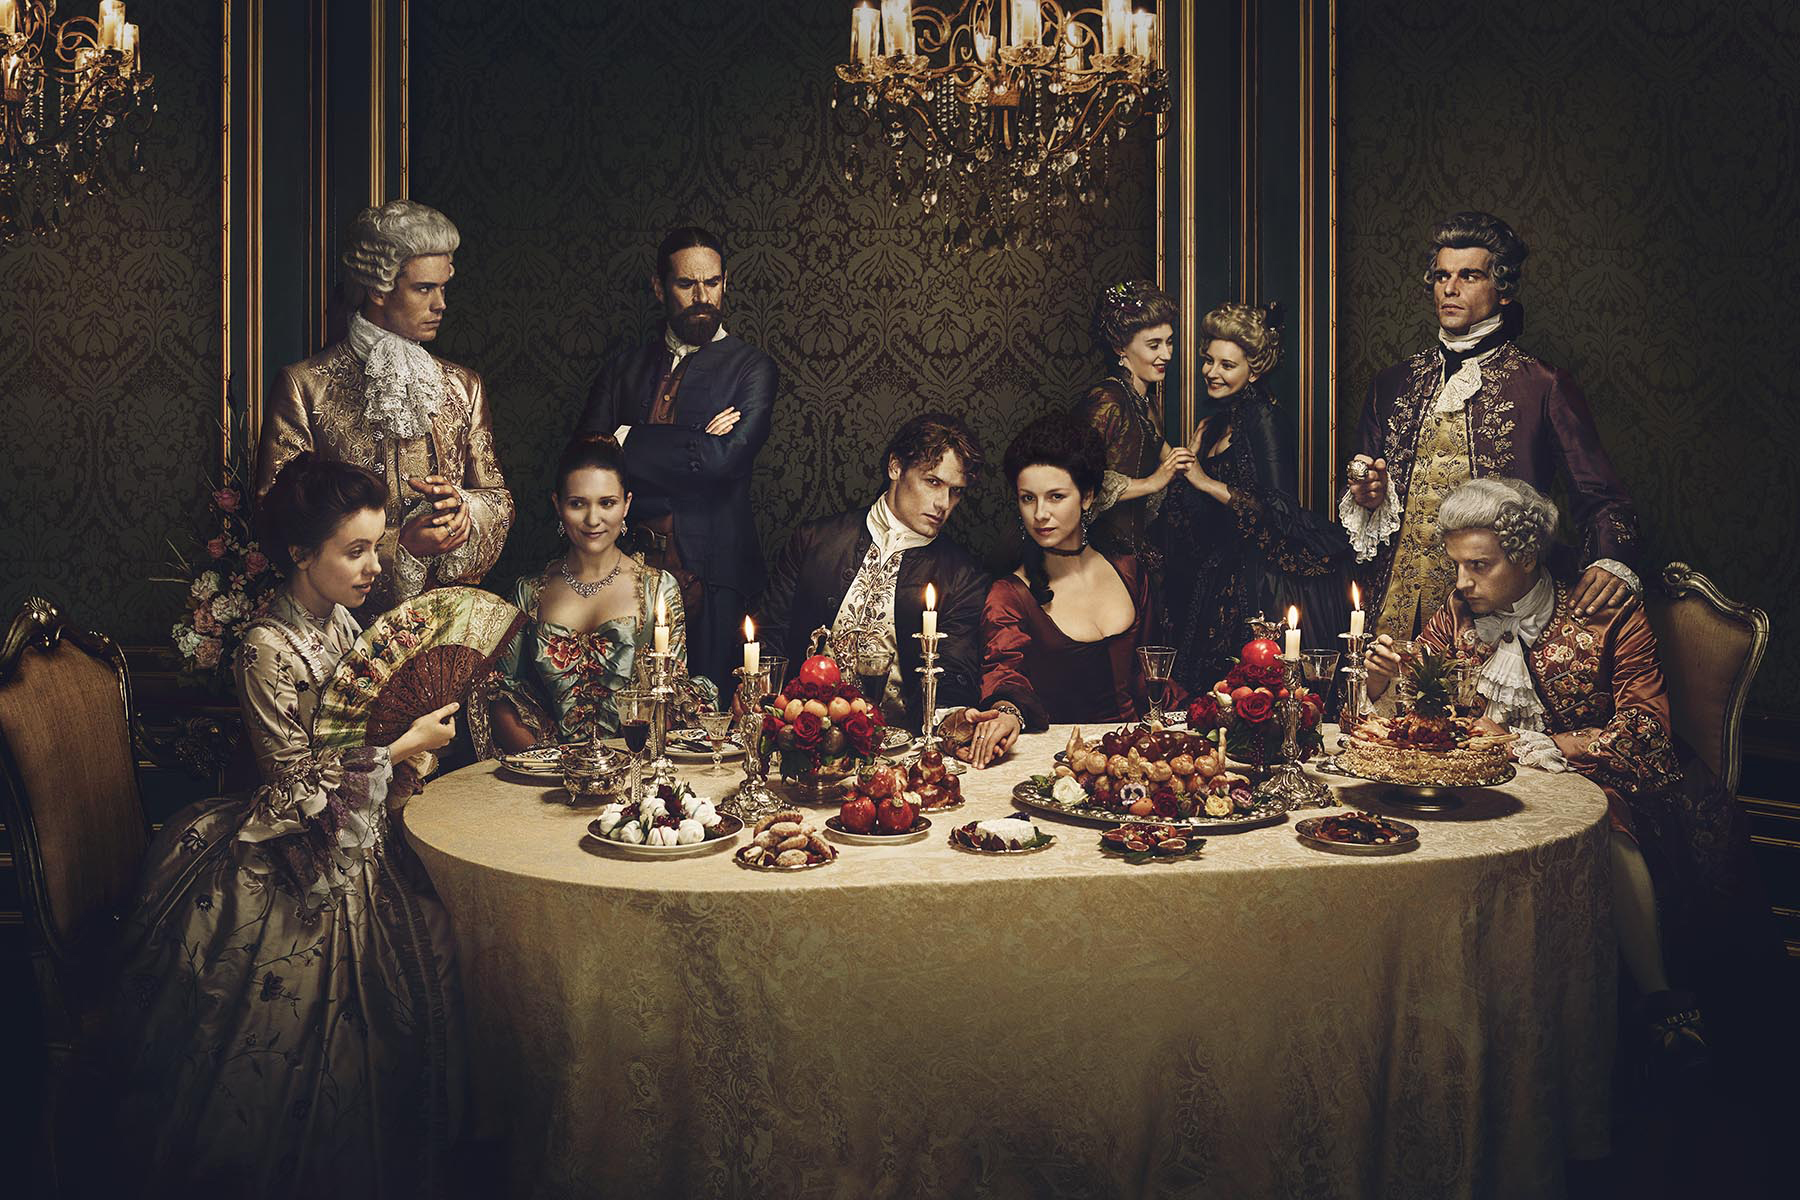 The cast of Outlander, Season 2 in all their finery.